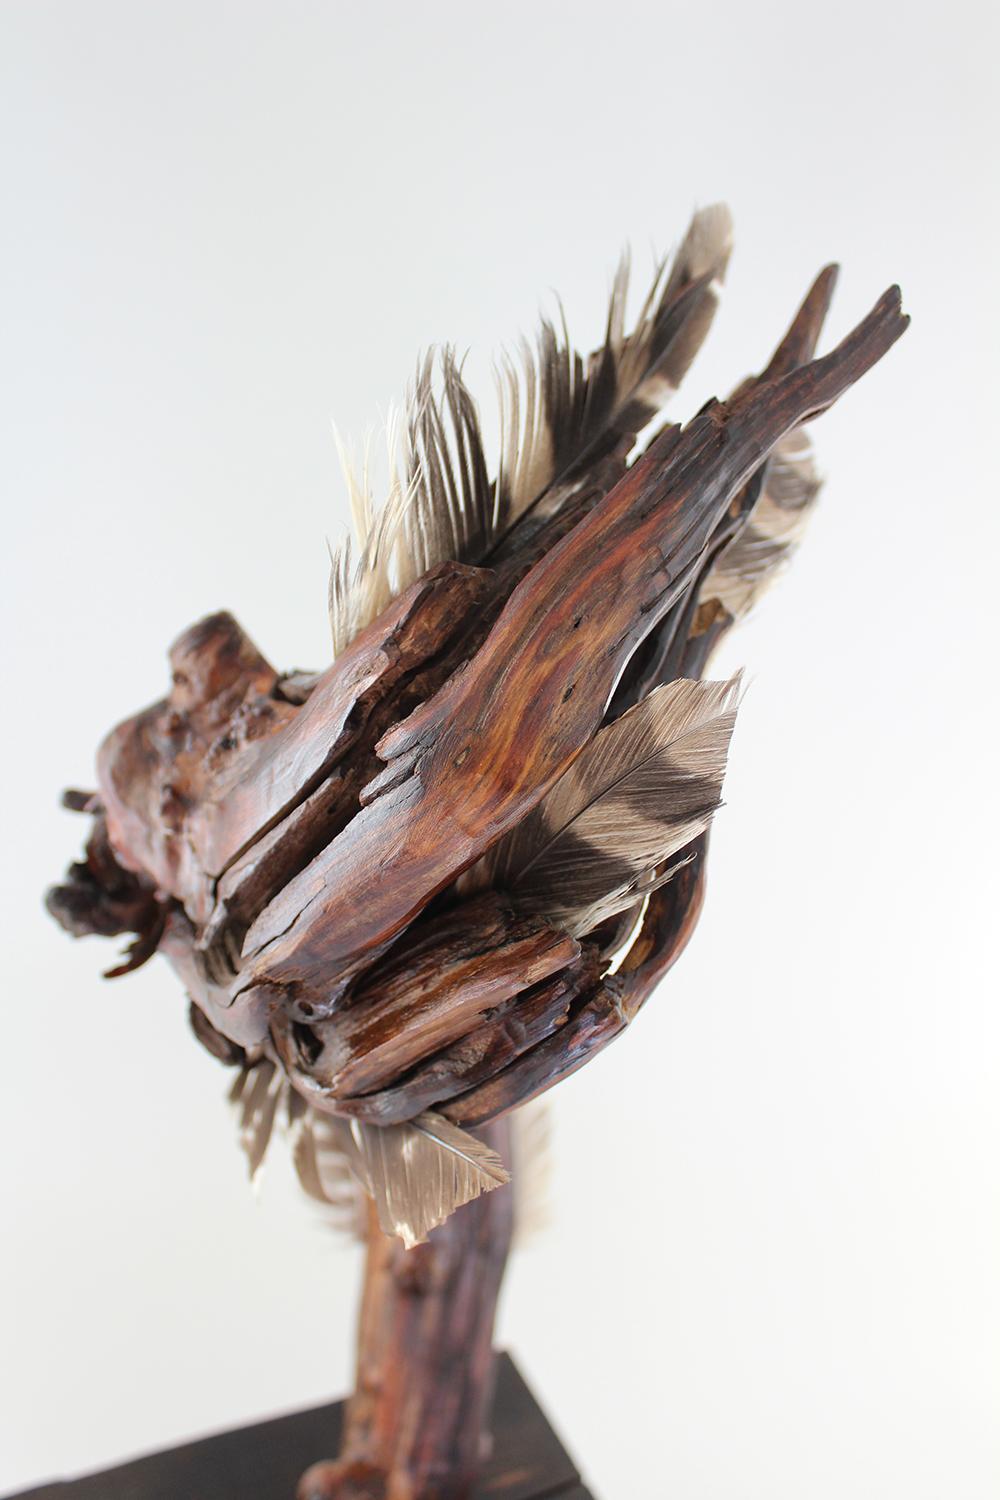 Miller Opie’s “Ascending Flourish” is a gestural 21 x 8.5 x 6.25 inch Mountain Laurel wood sculpture with found feather details embedded into the wooden grain. Opie used the natural twist of the wood to create movement which is enhanced by the